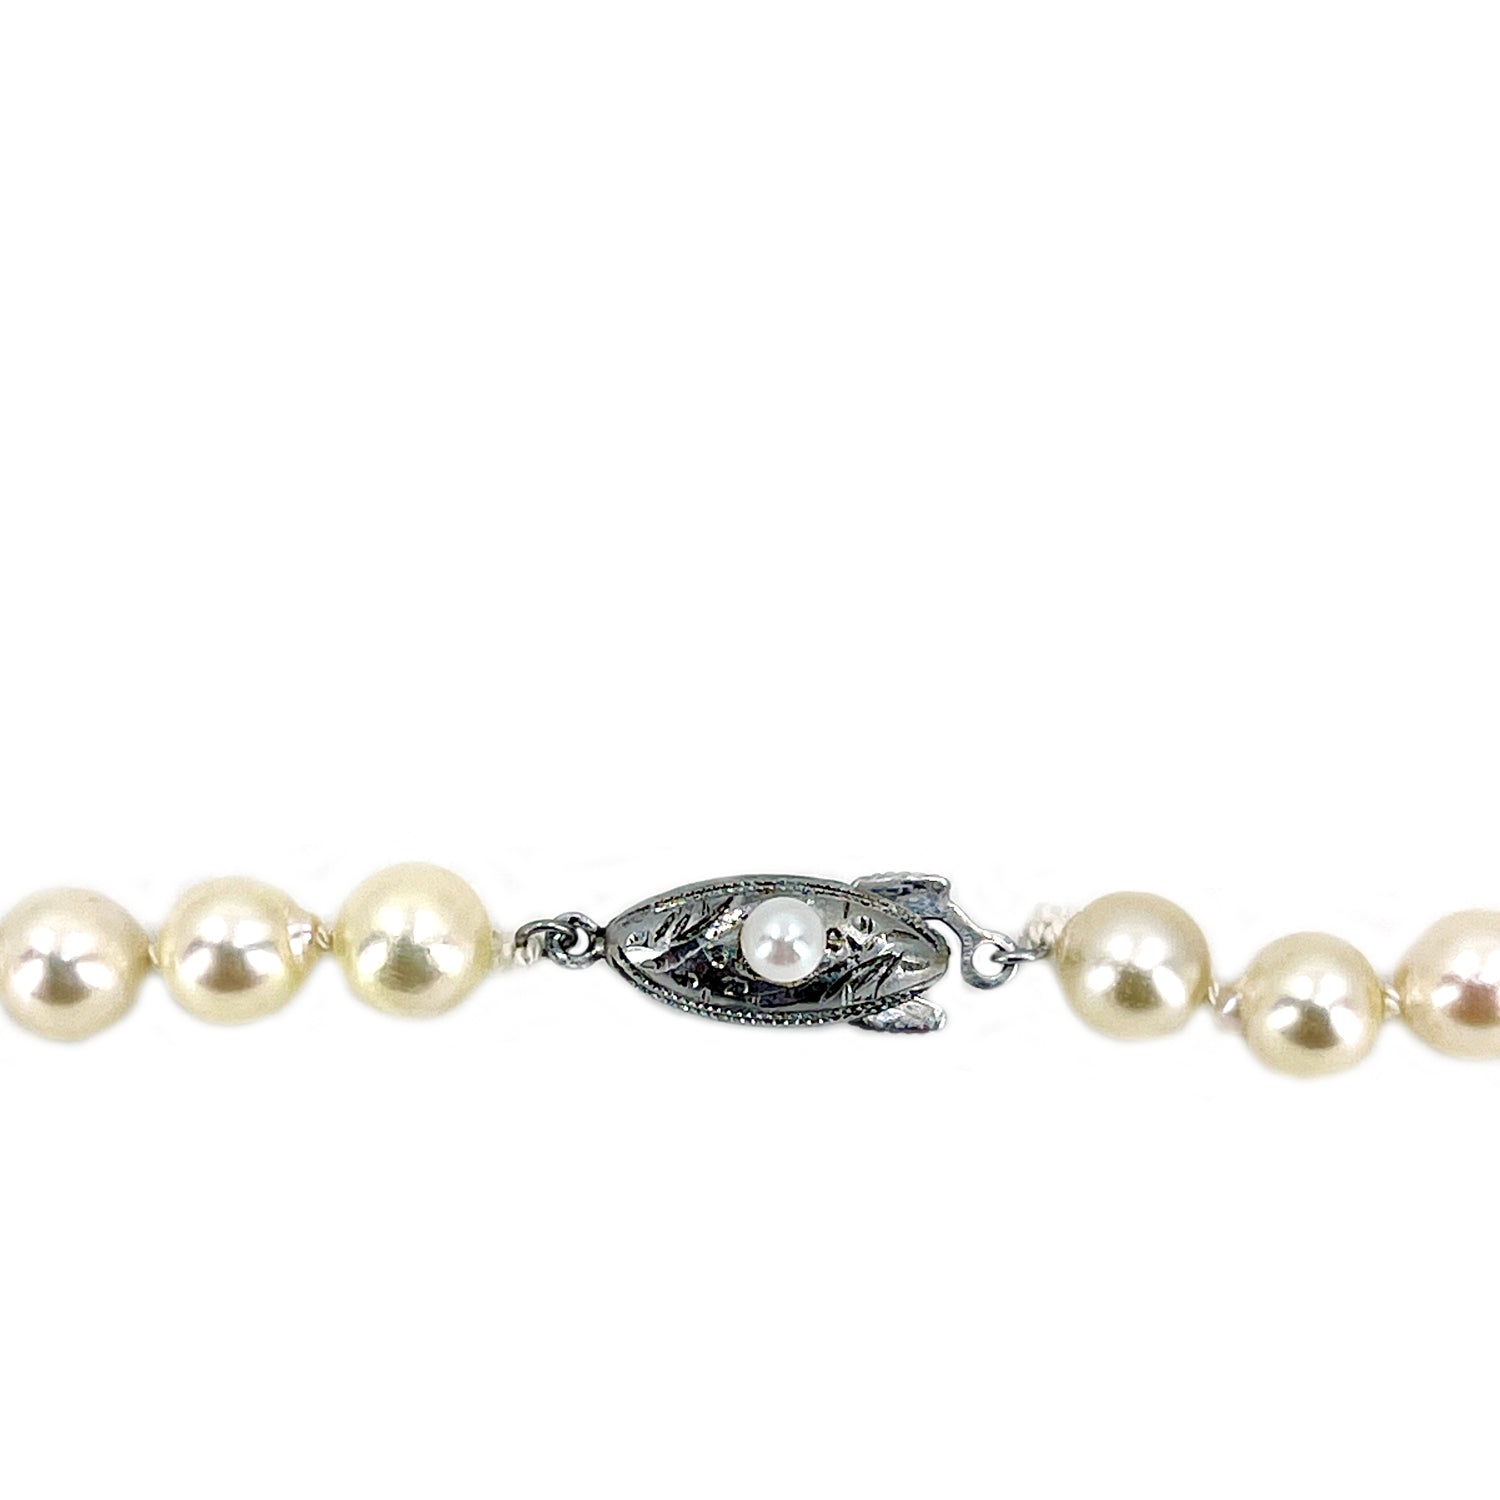 Cream Light Golden Japanese Saltwater Cultured Akoya Pearl Vintage Choker Necklace - Sterling Silver 16 Inch